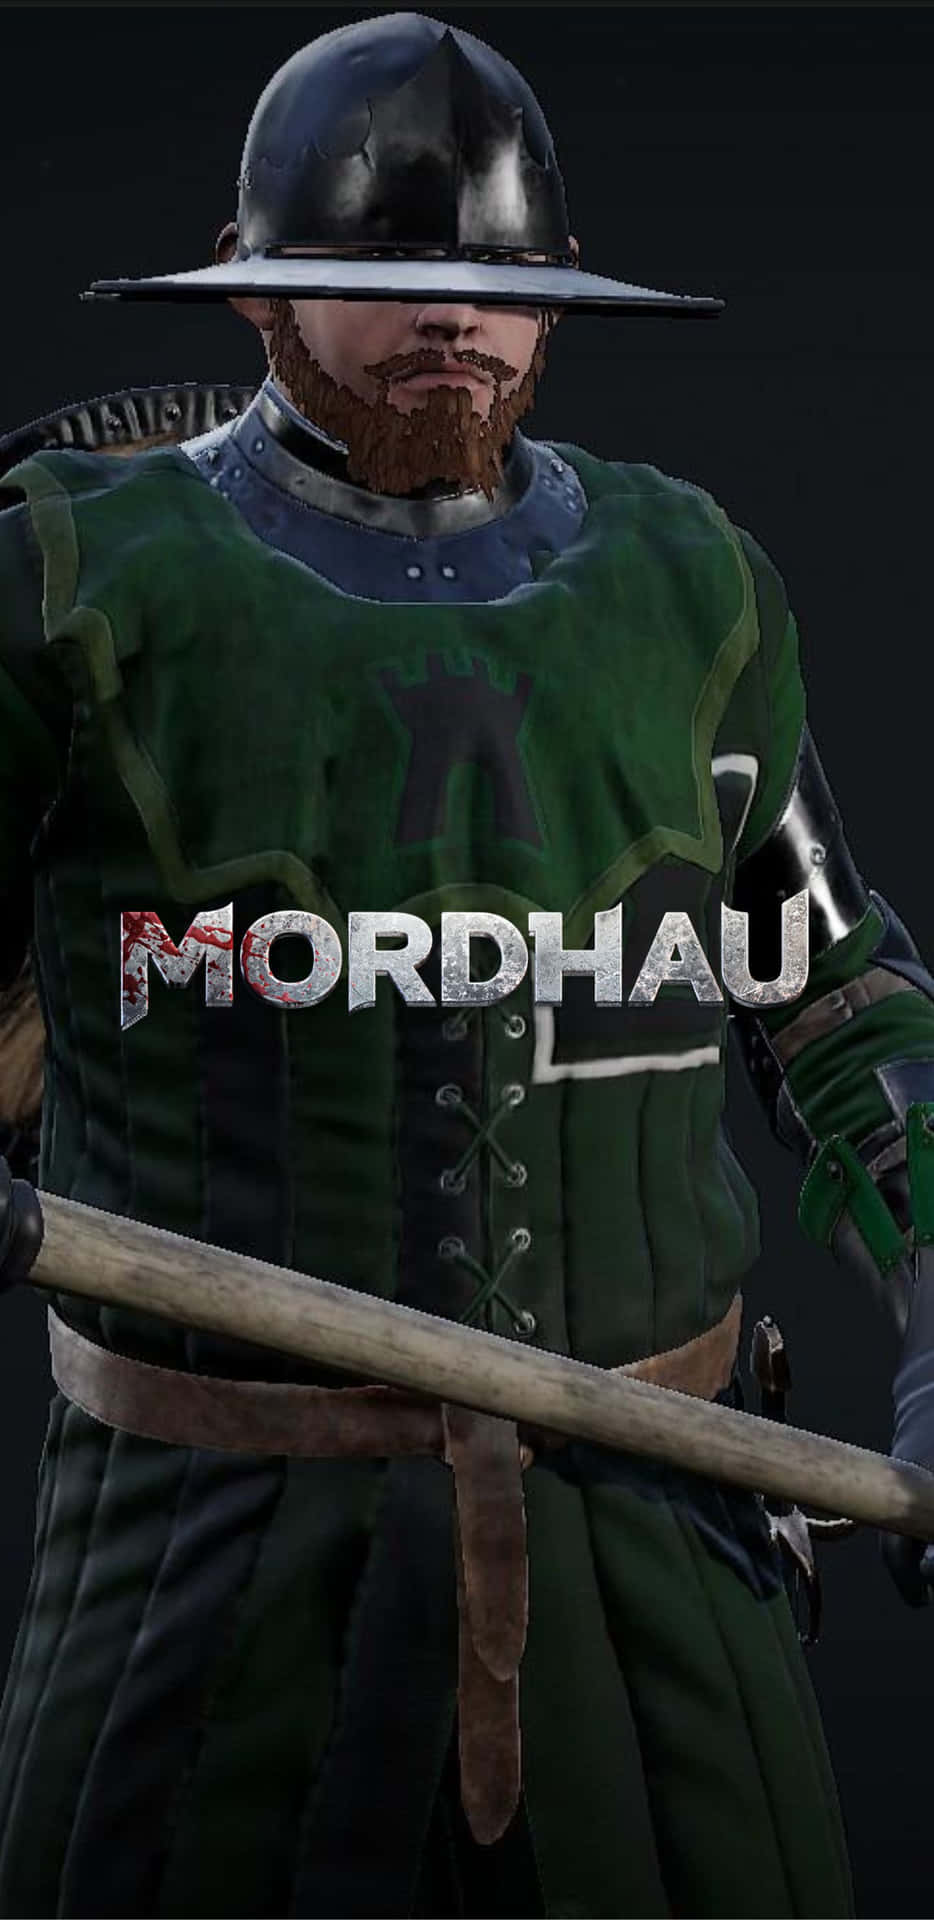 Play Mordhau and Experience The Adventure on Google Pixel 3XL